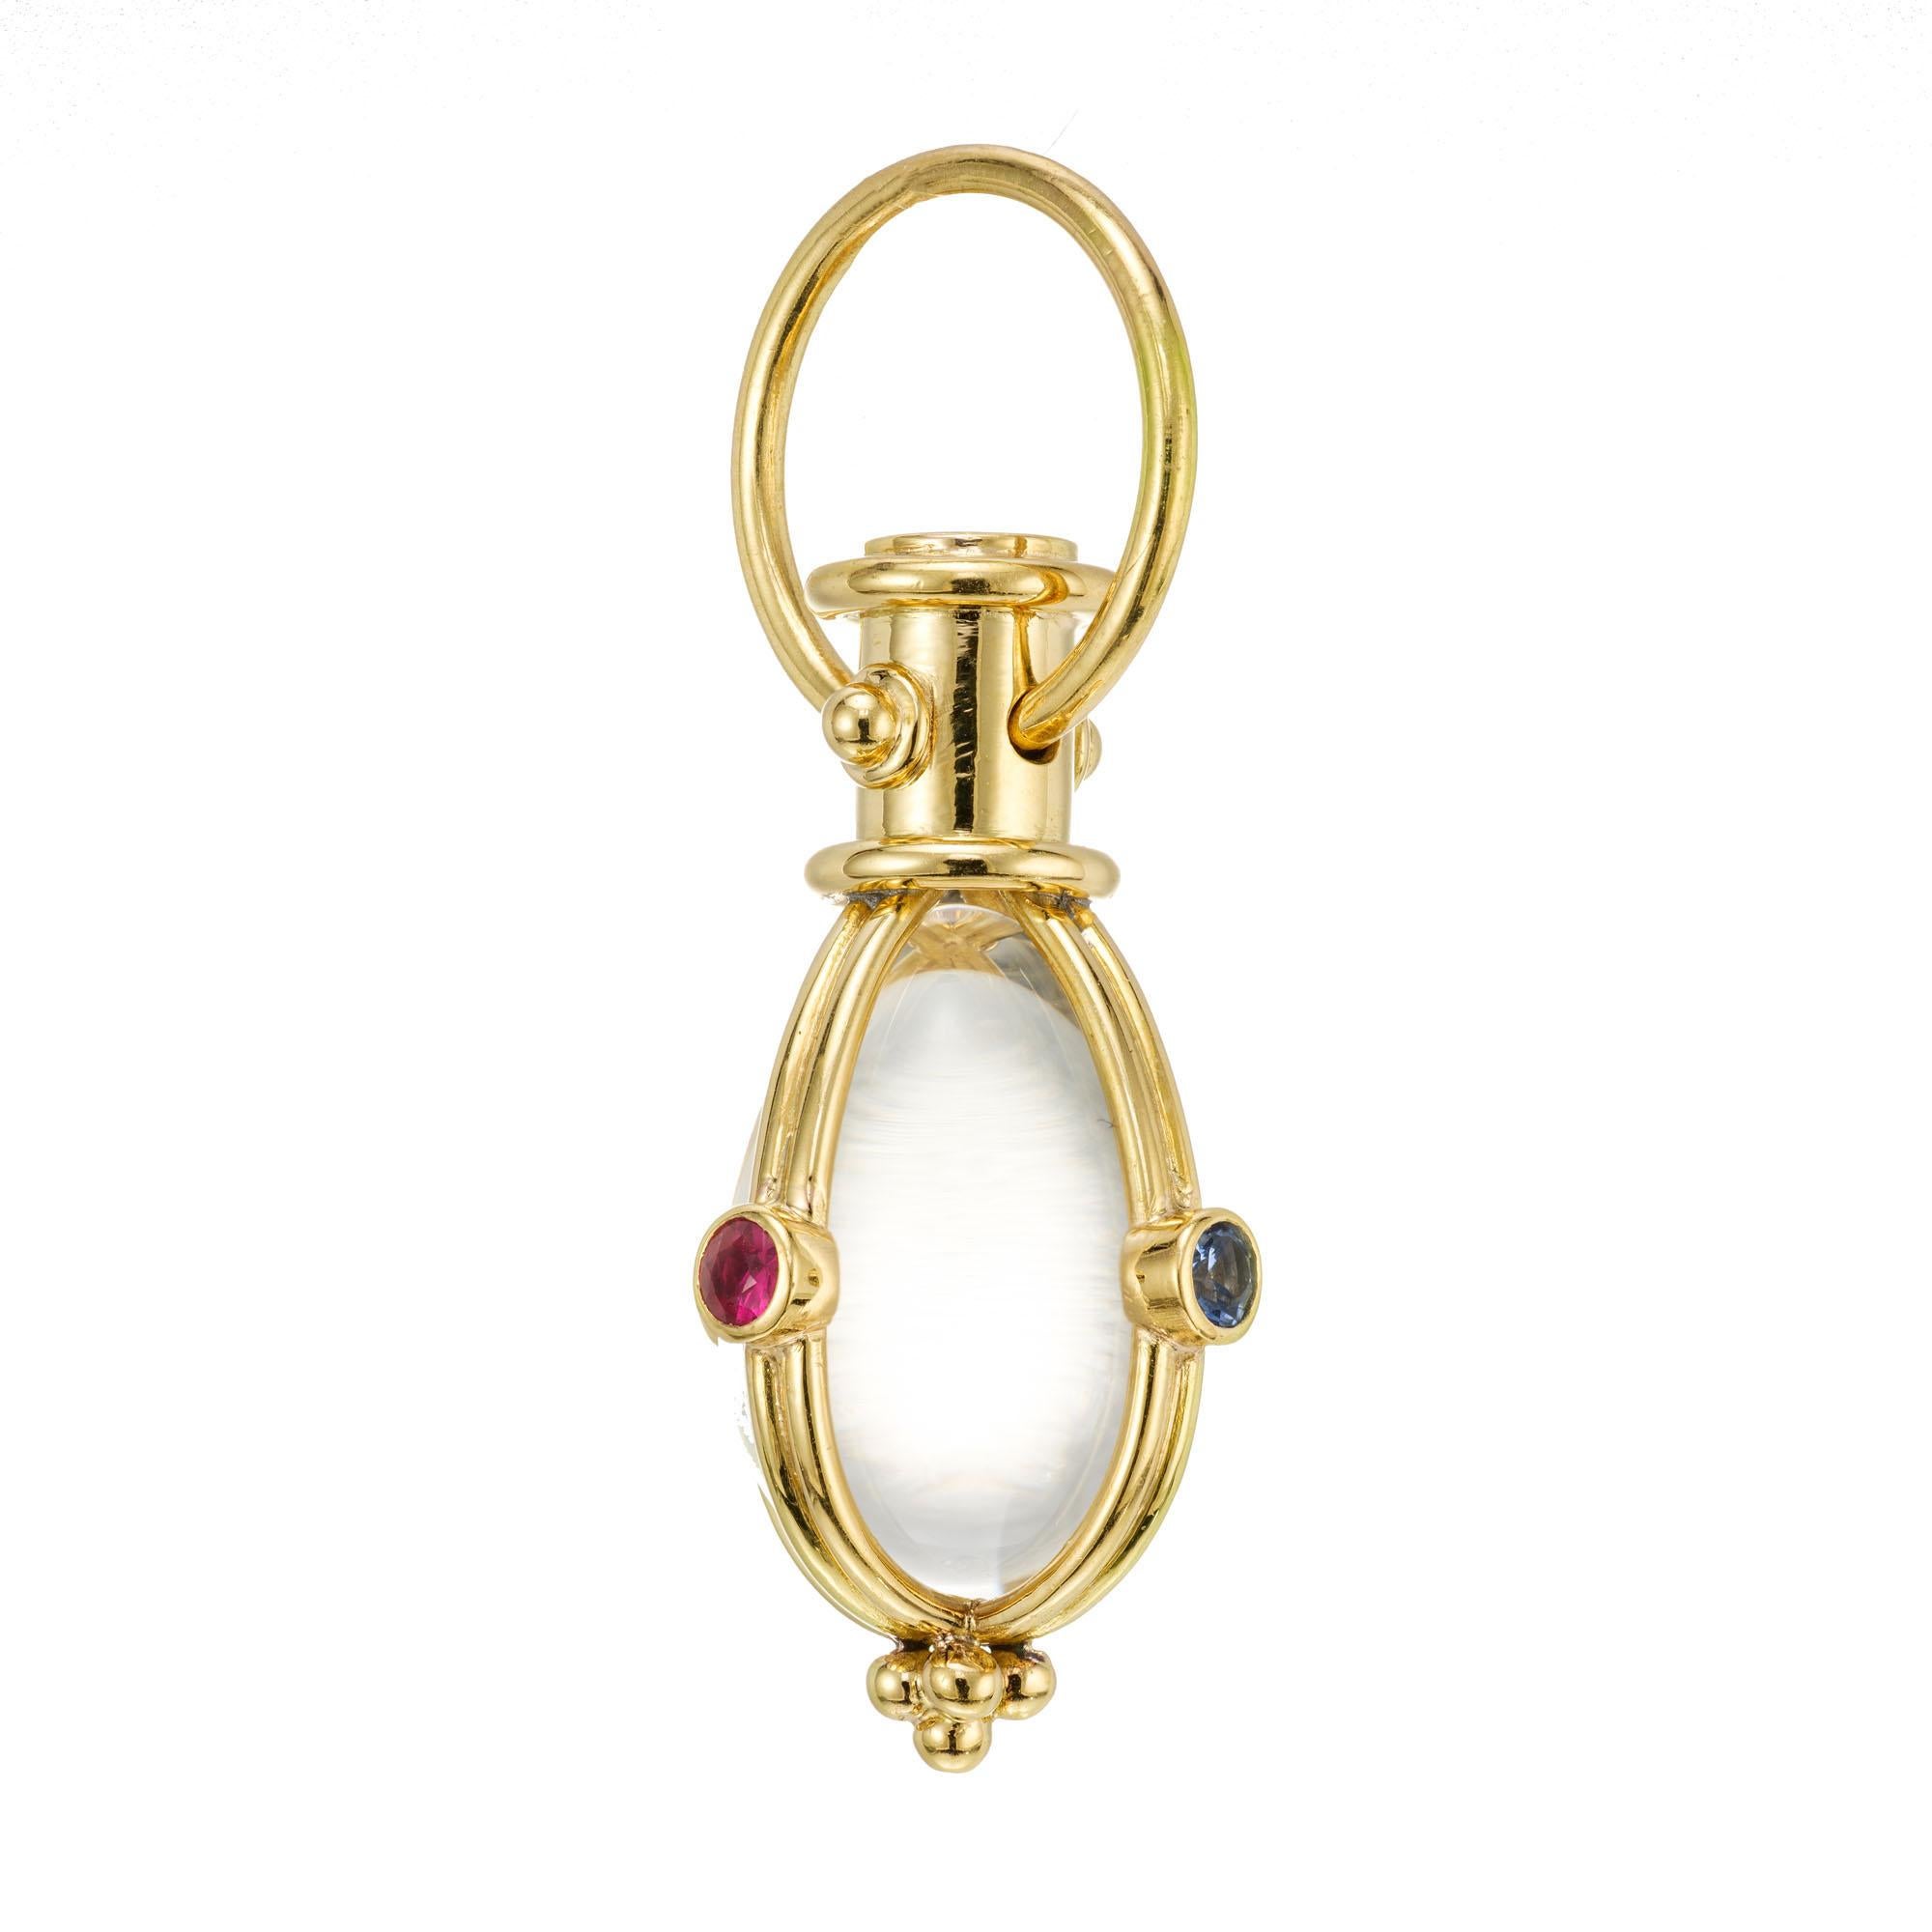 Temple St. Clair Amulet gemstone pendant. Pear quartz crystal set in 18k gold with round ruby, emerald and sapphire accent stones. 

1 pear cabochon clear rock crystal quartz
2 round red rubies, approx. .20cts
1 round green emerald, approx. .7cts
1